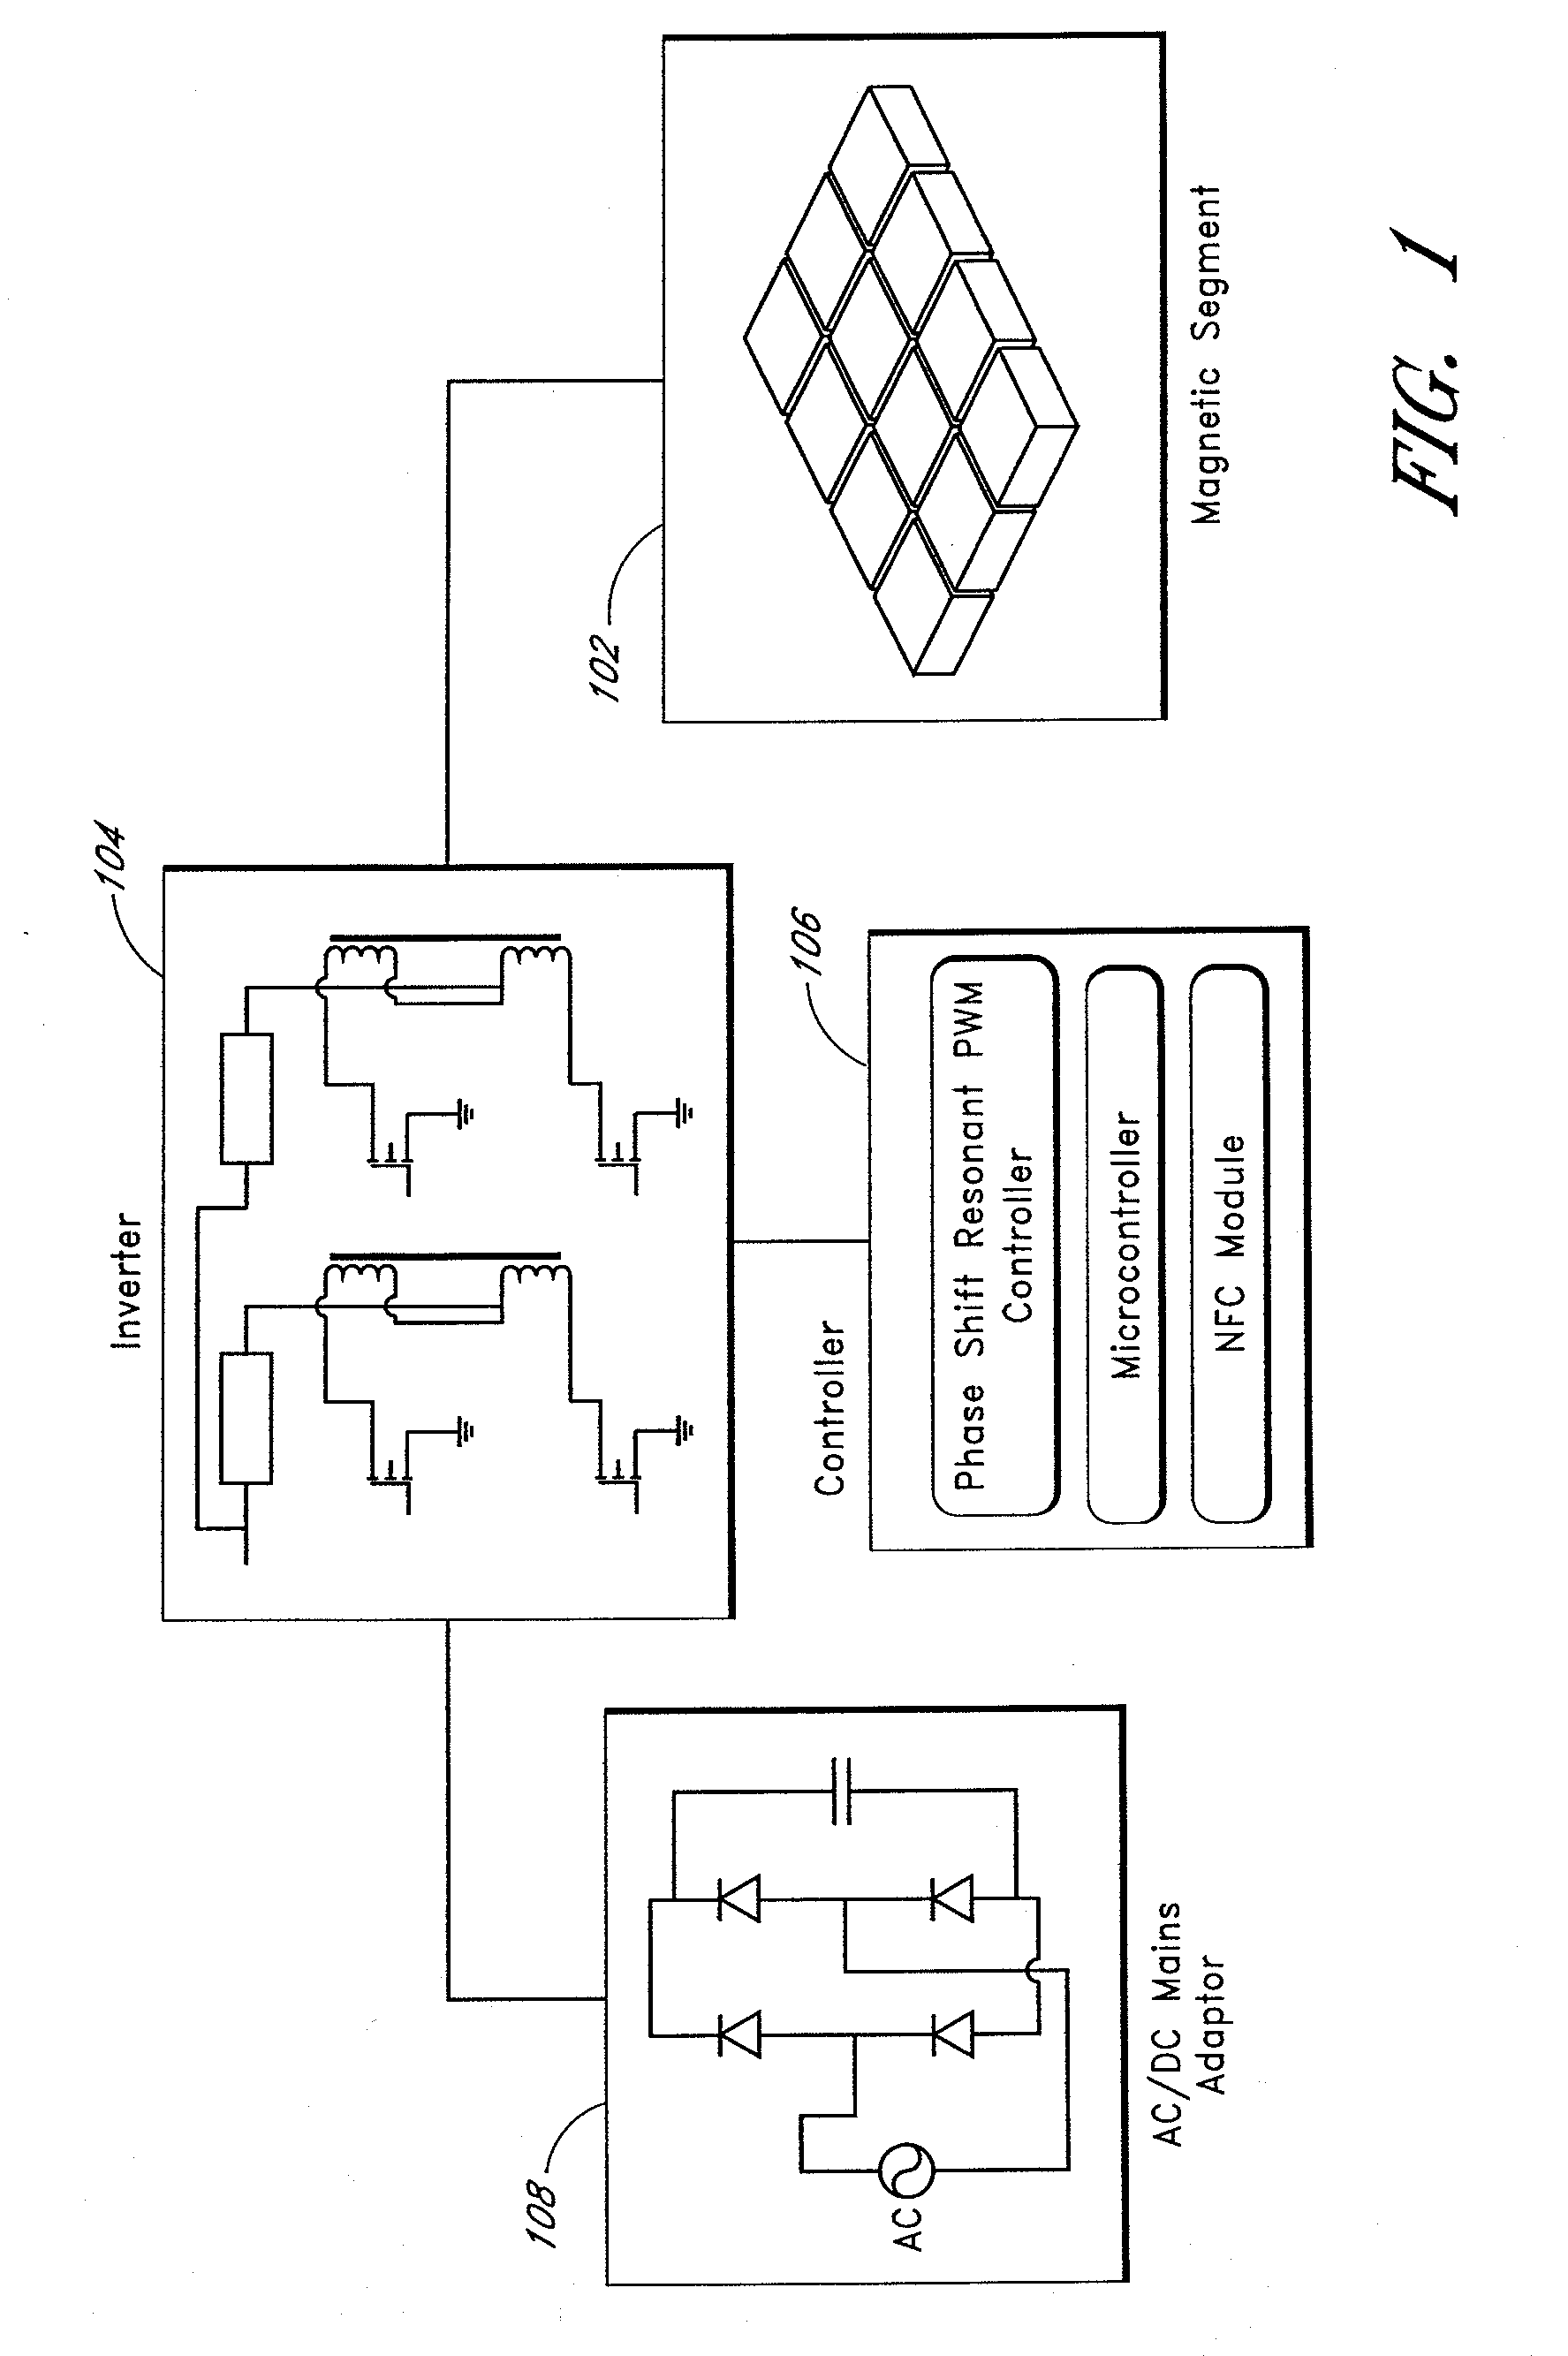 Systems and methods for wireless power transfer